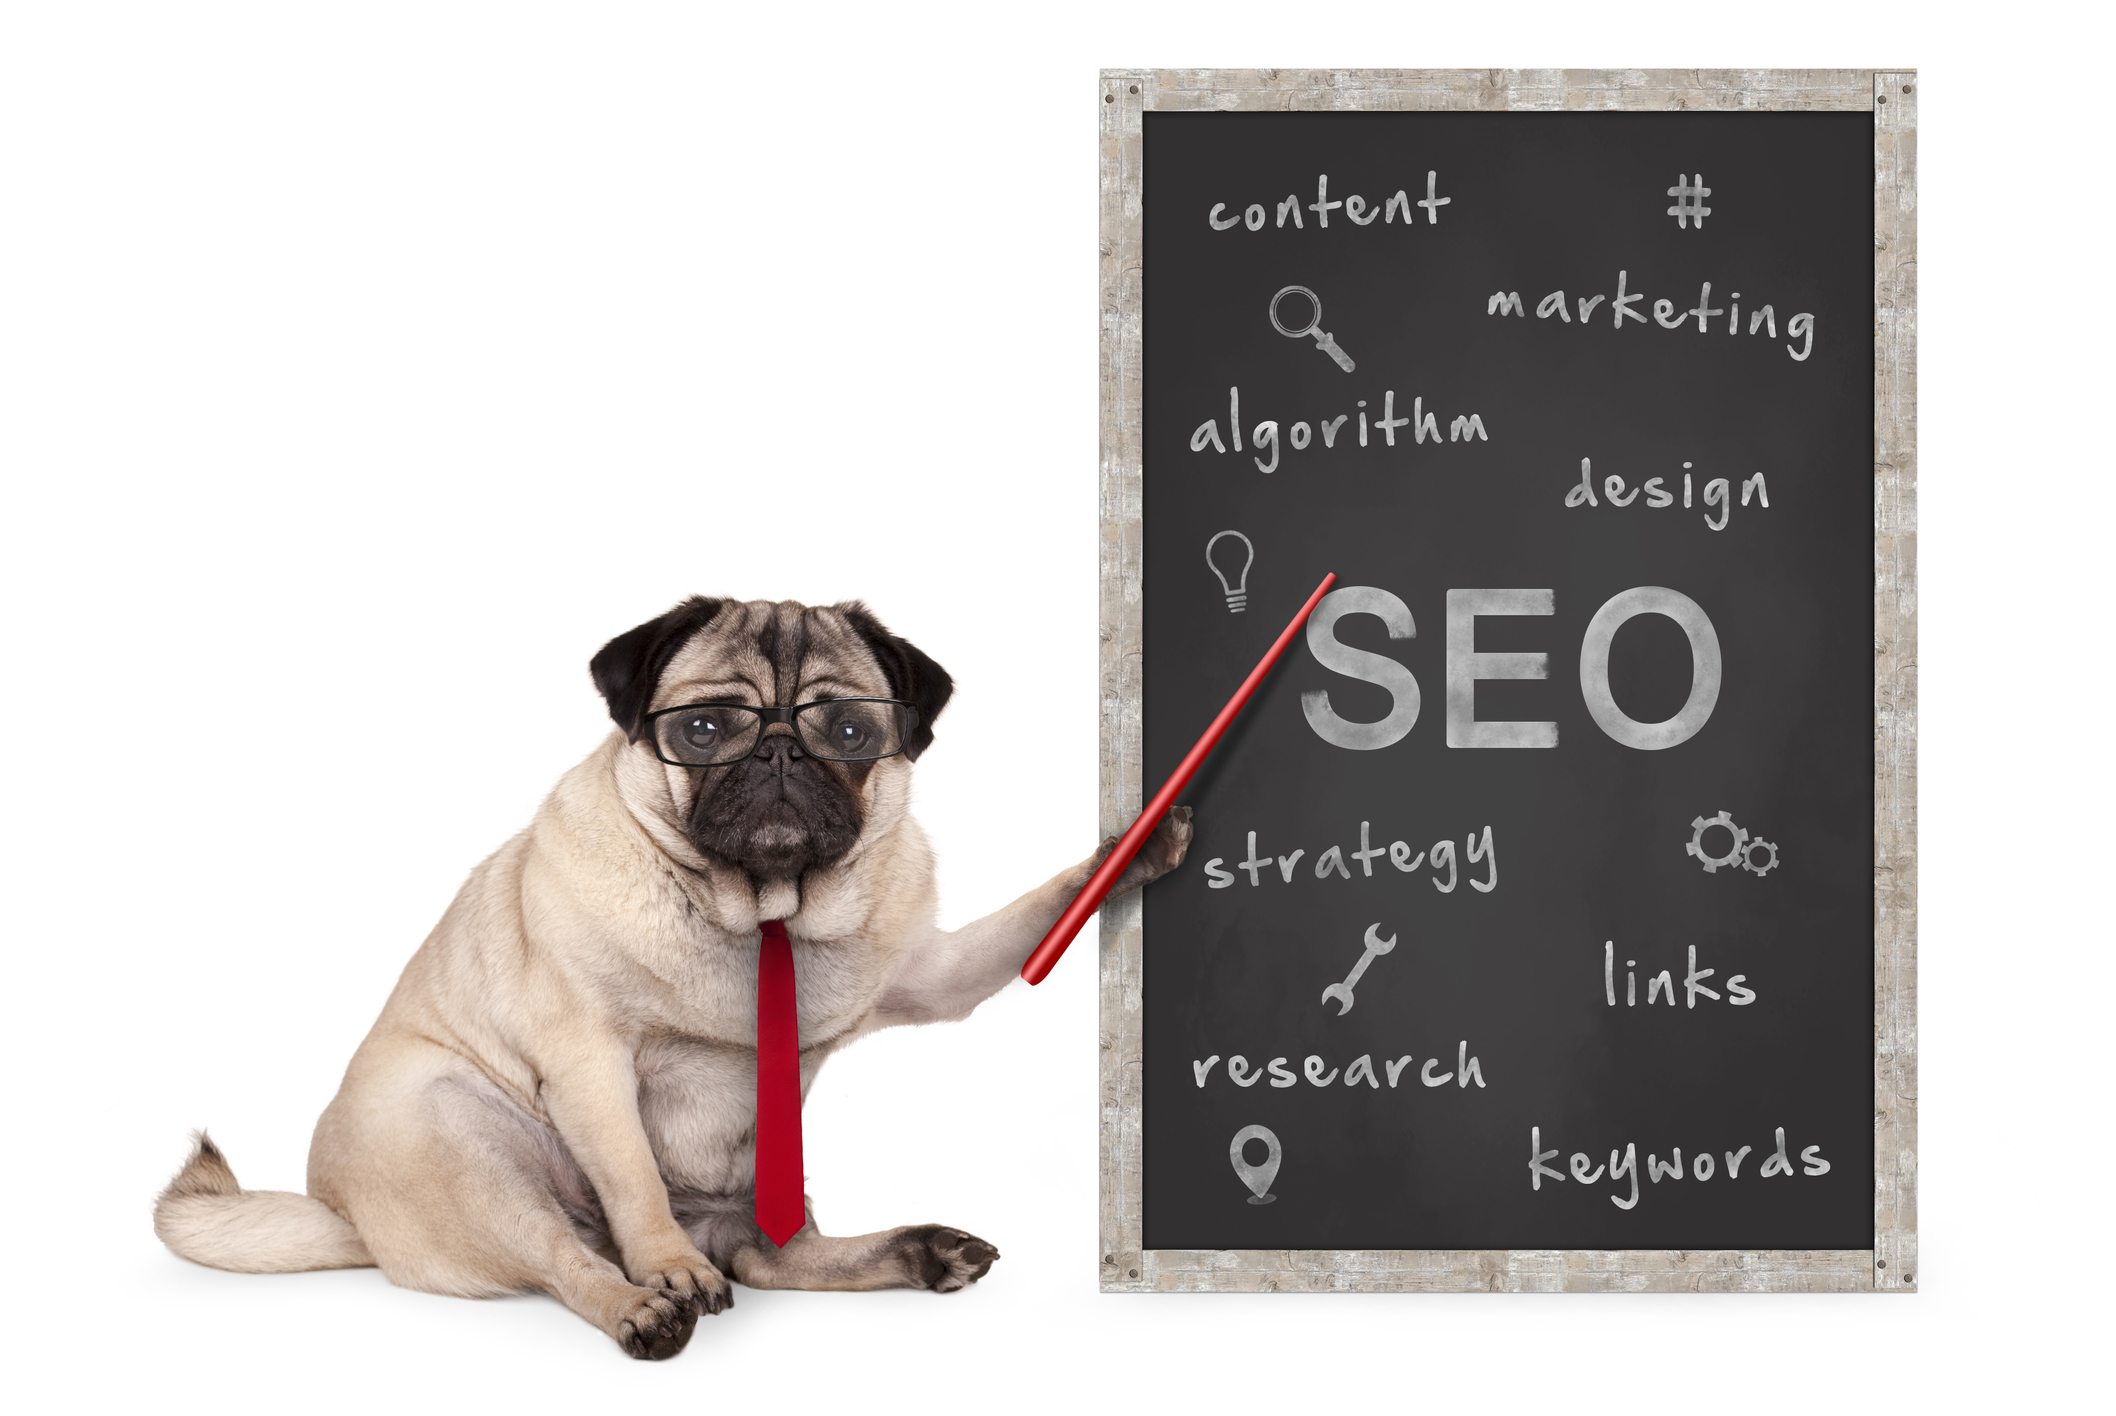 A pug in glasses and a tie shows tips for seo on a blackboard